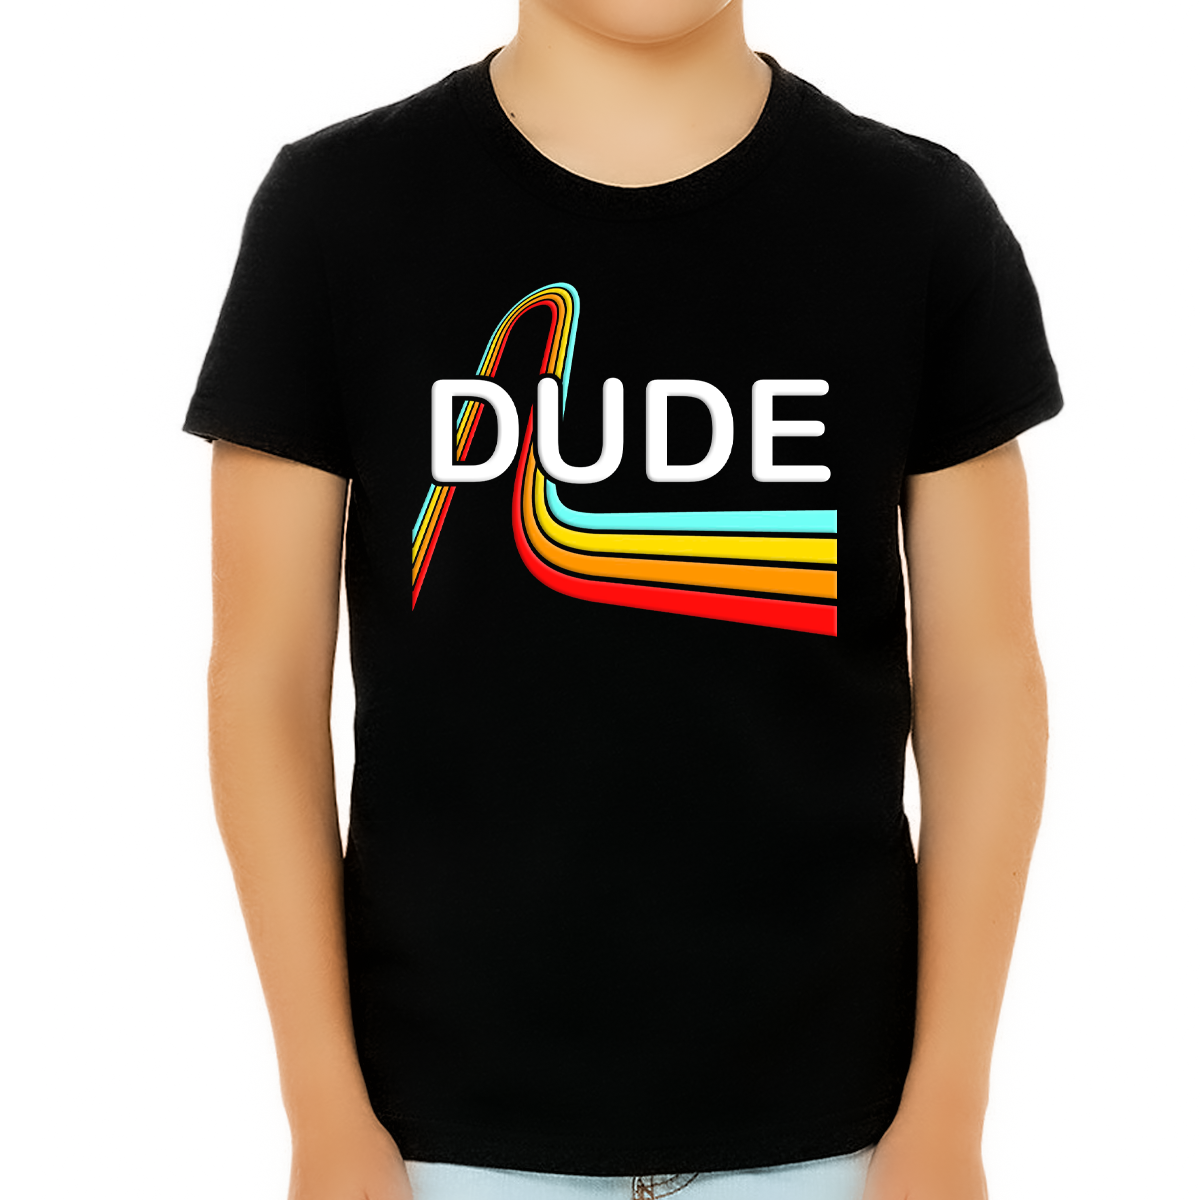 Perfect Dude Merchandise - Perfect Dude Shirt for BOYS YOUTH KIDS - Novelty Vintage Graphic Tees - Big Lebowski Shirt